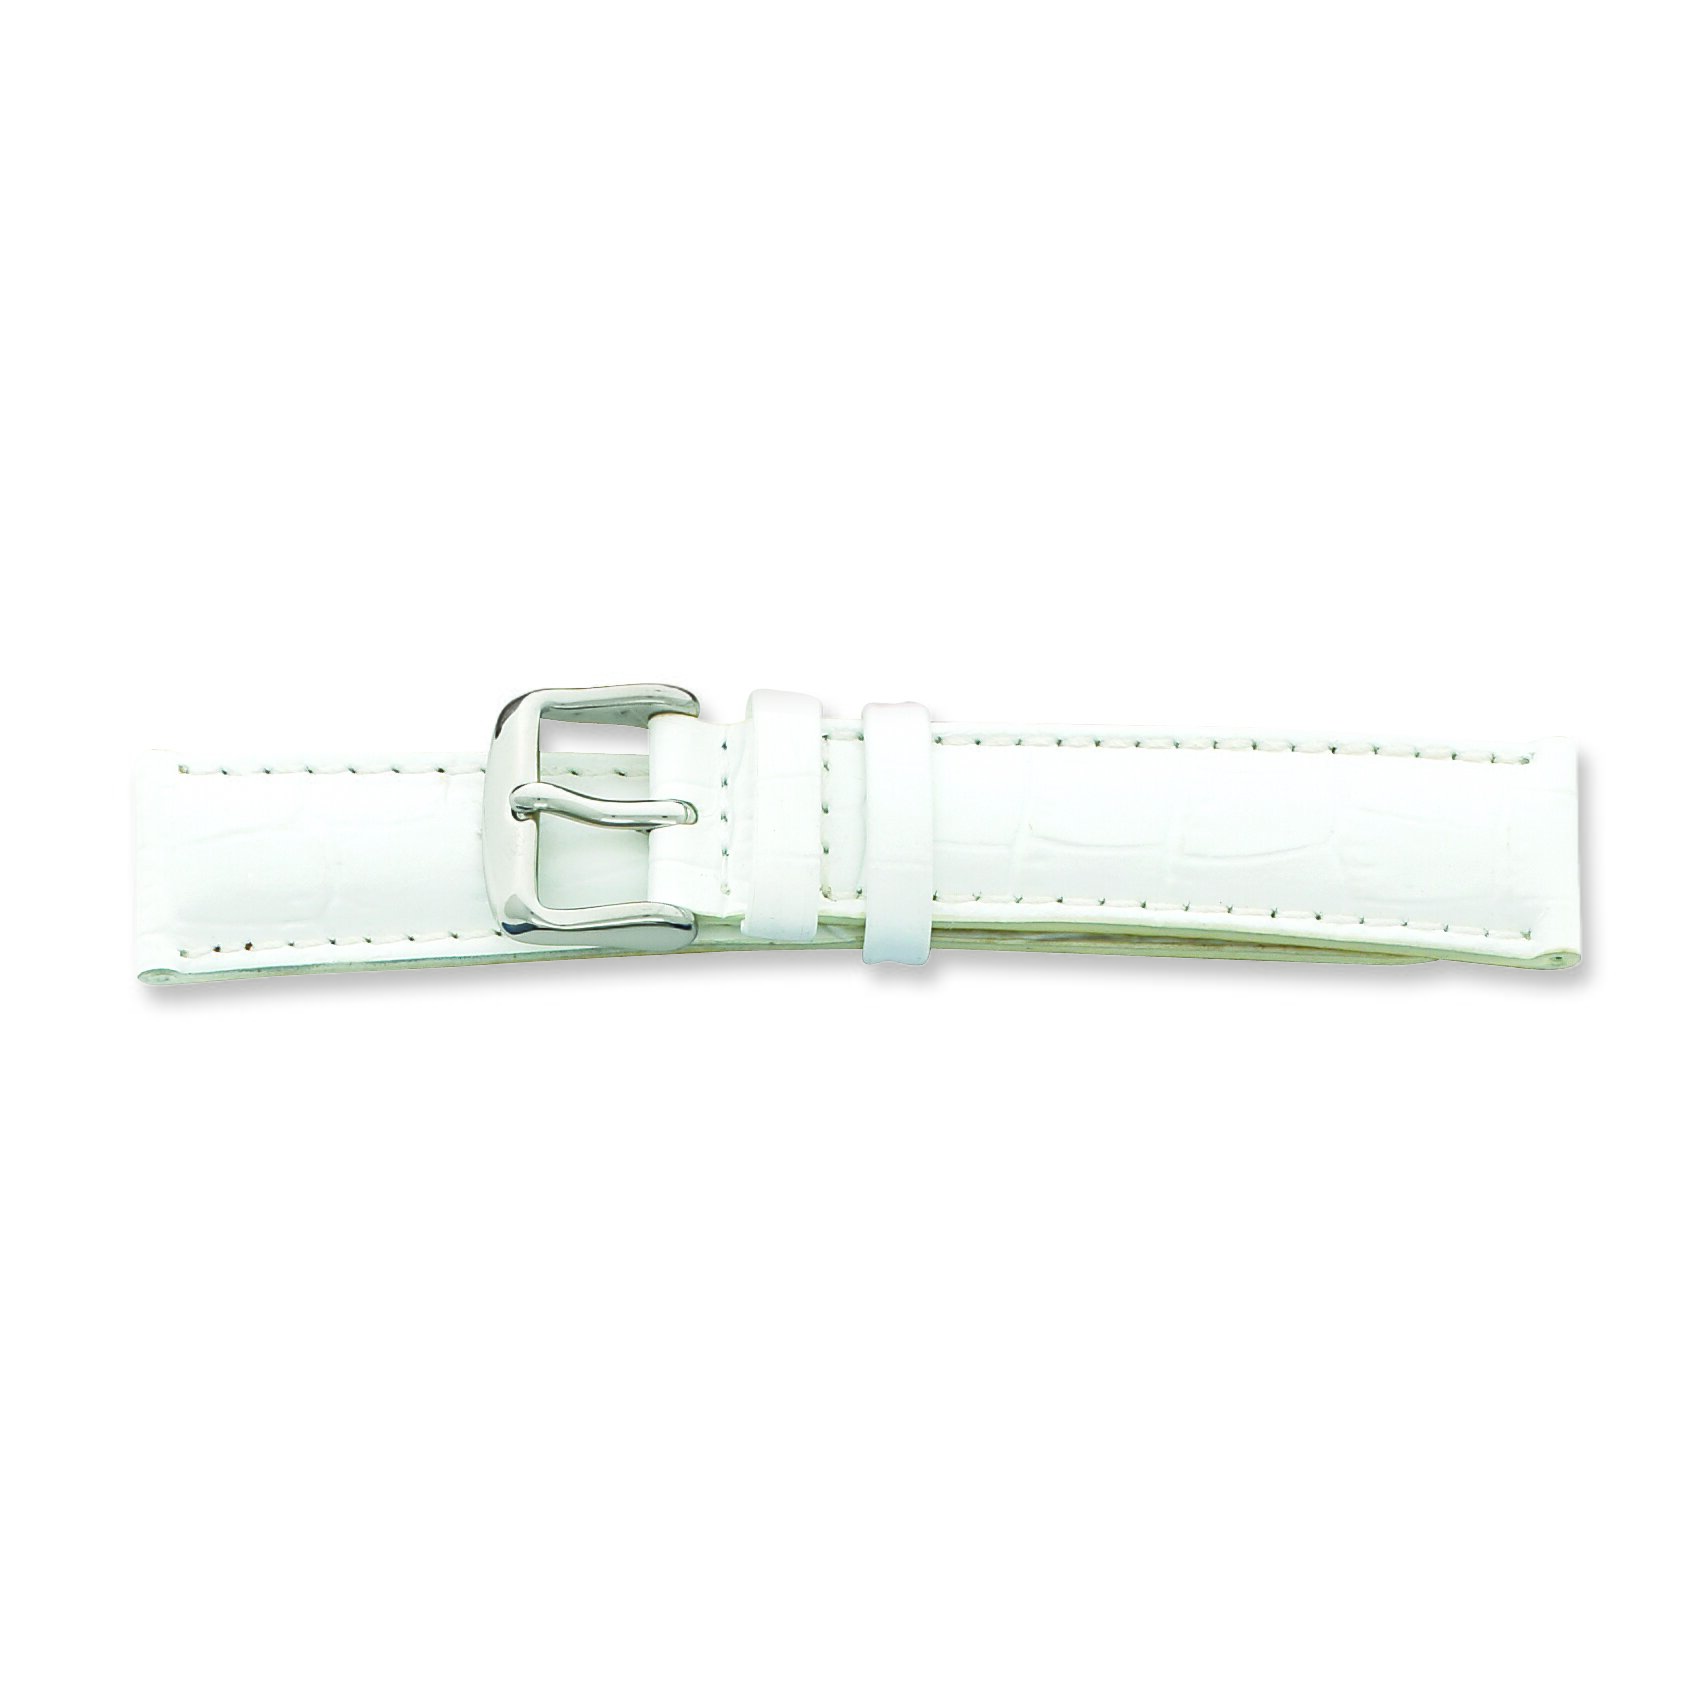 Findingking de Beer White Crocodile Grain Leather Watch Band 18mm